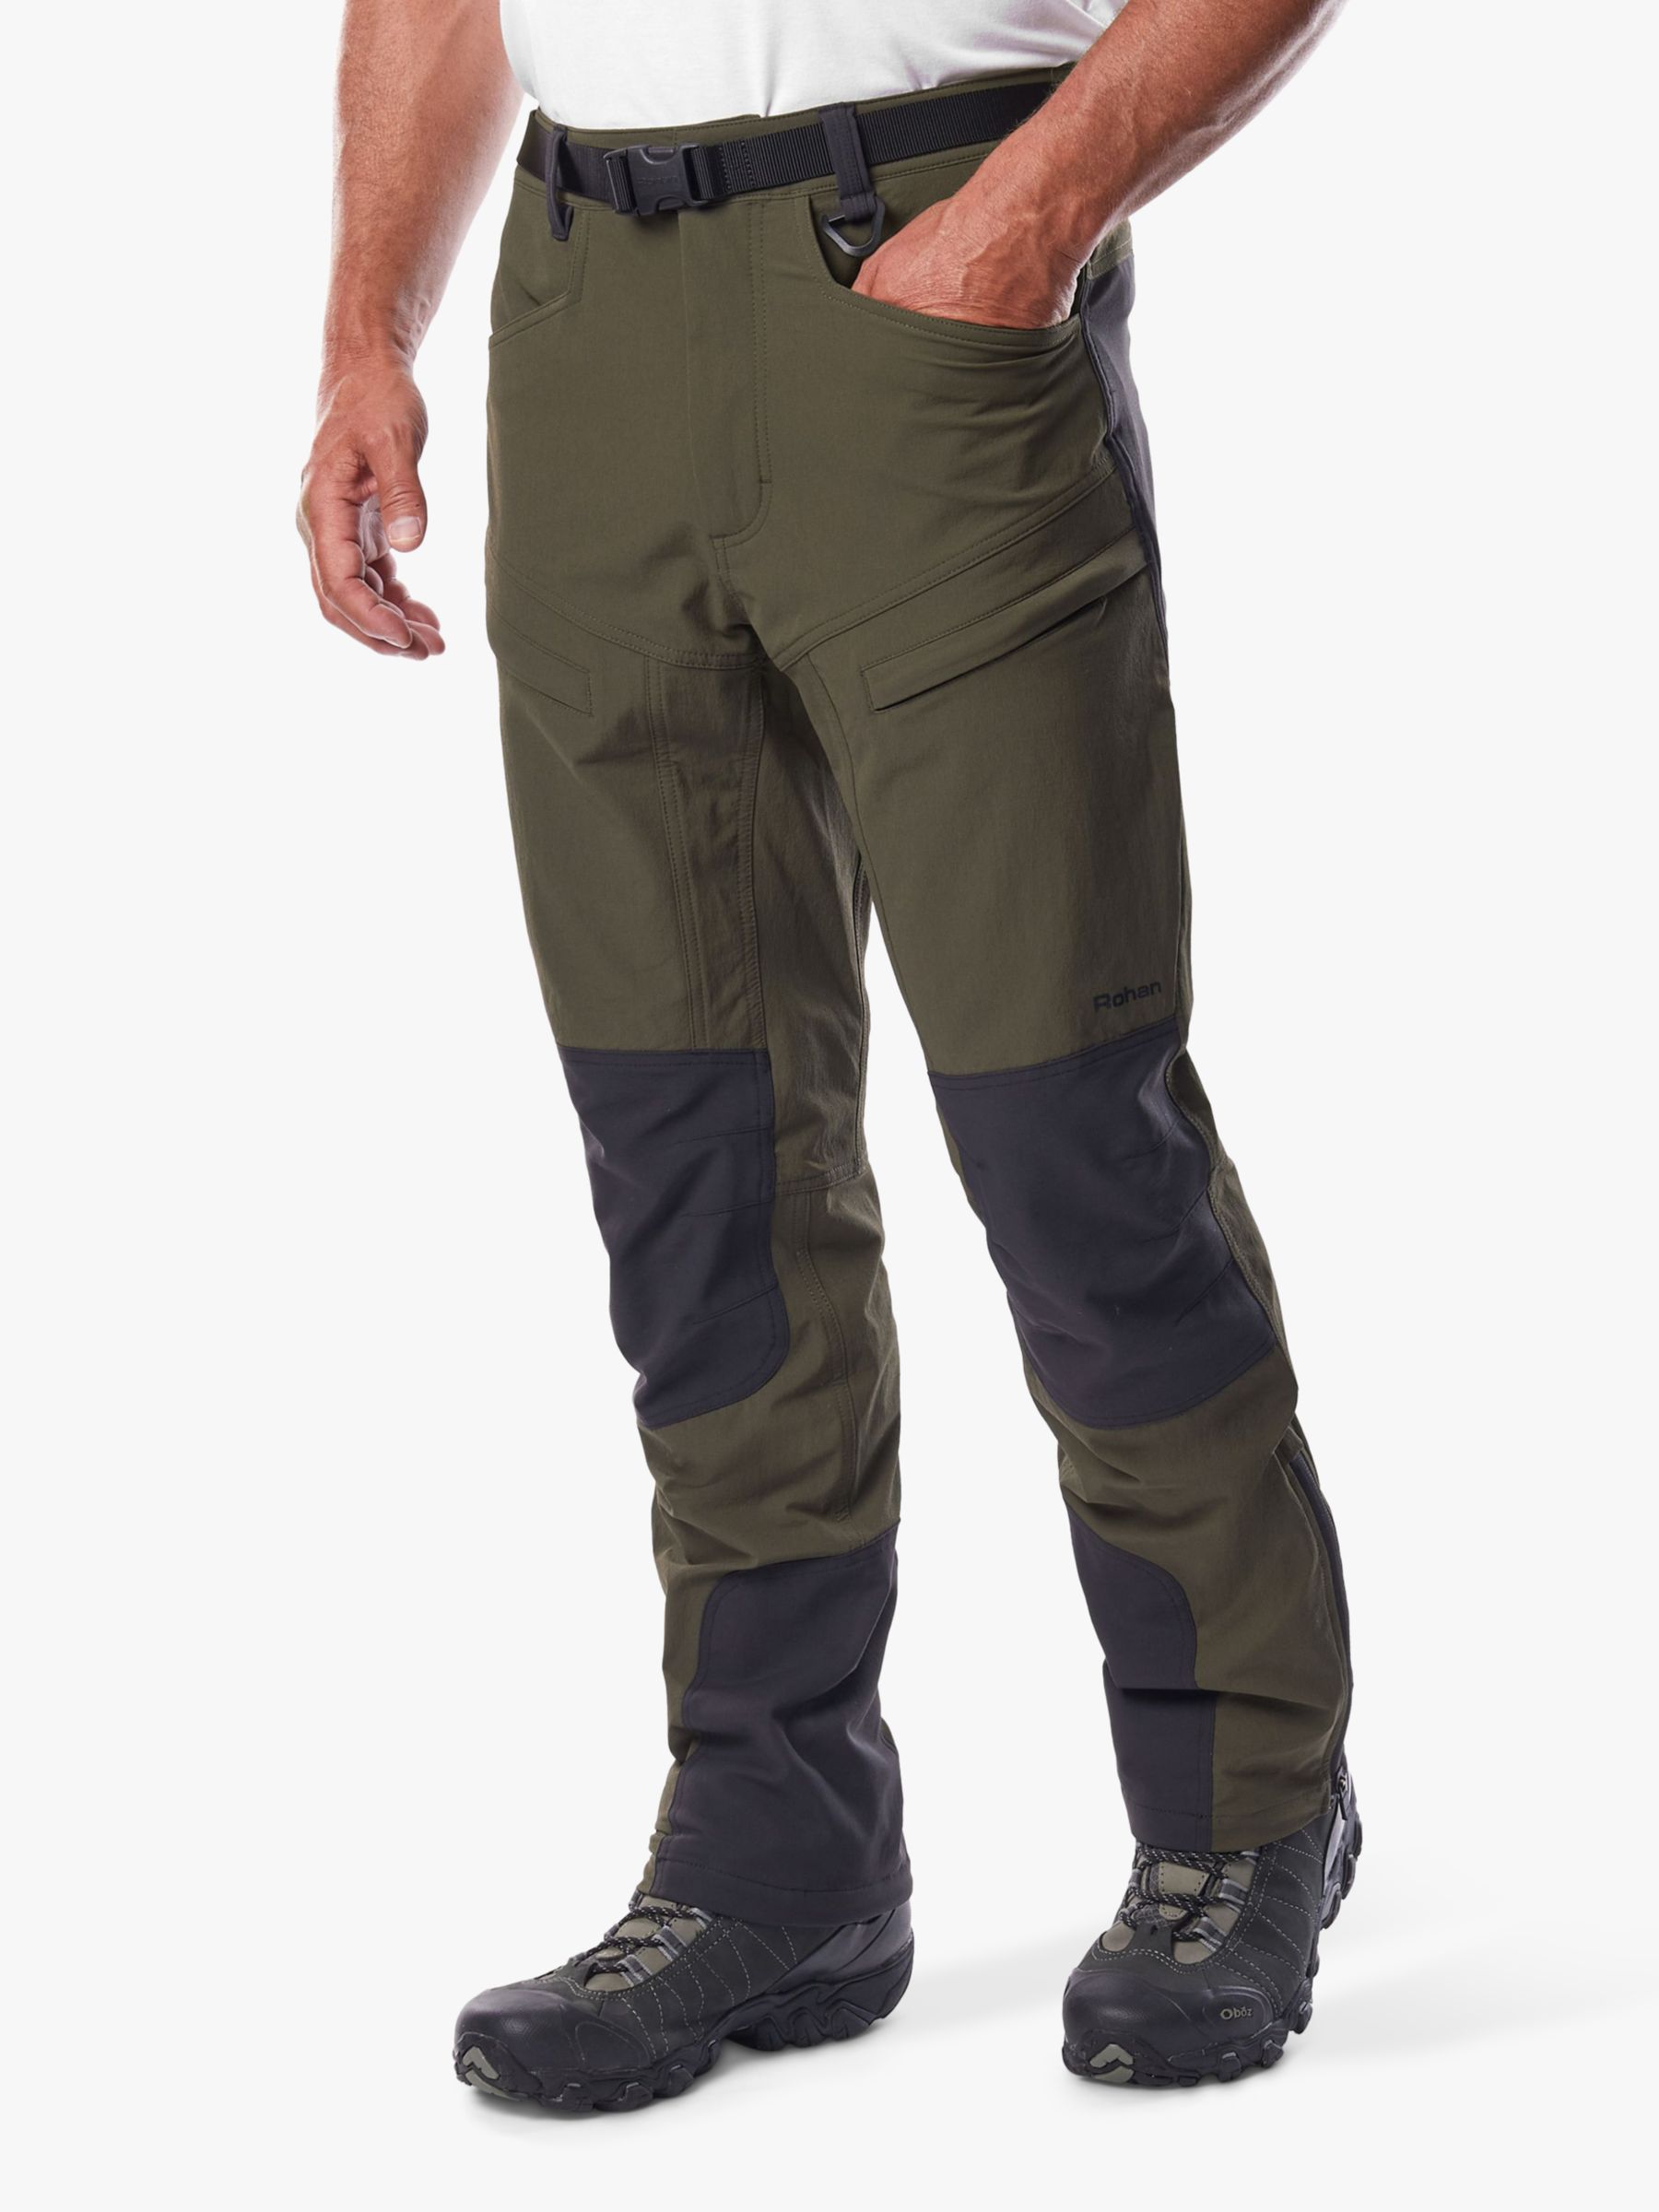 Rohan Fjell Hiking Trousers, Olive Brown/Black at John Lewis & Partners